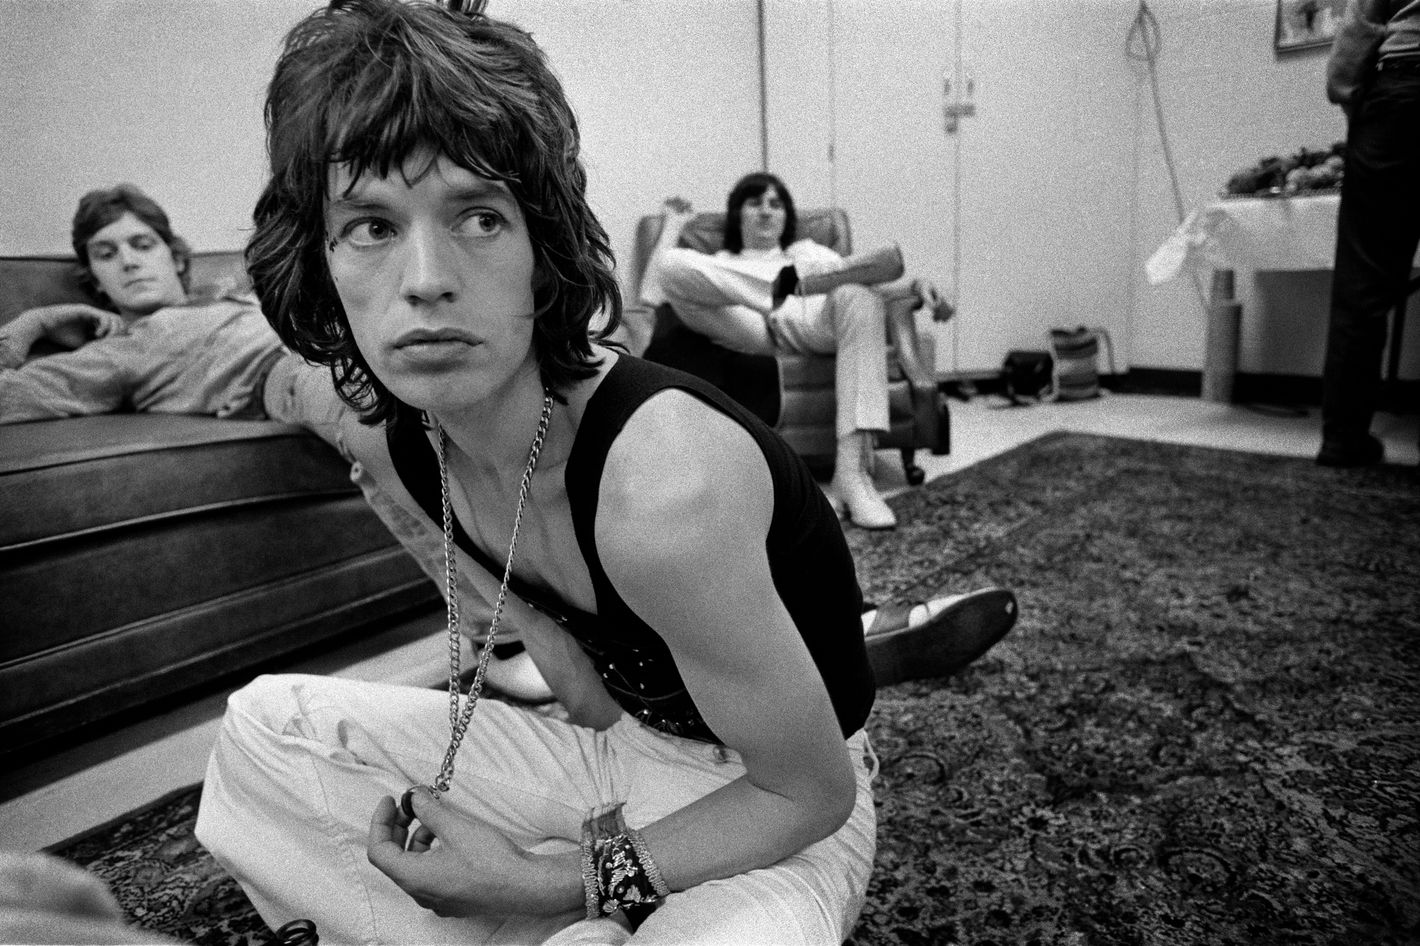 This Day in Music - We see Mick Jagger has had all his hair cut off? Only  joking, but it makes you wonder does Mick wear a wig? Any thoughts? |  Facebook